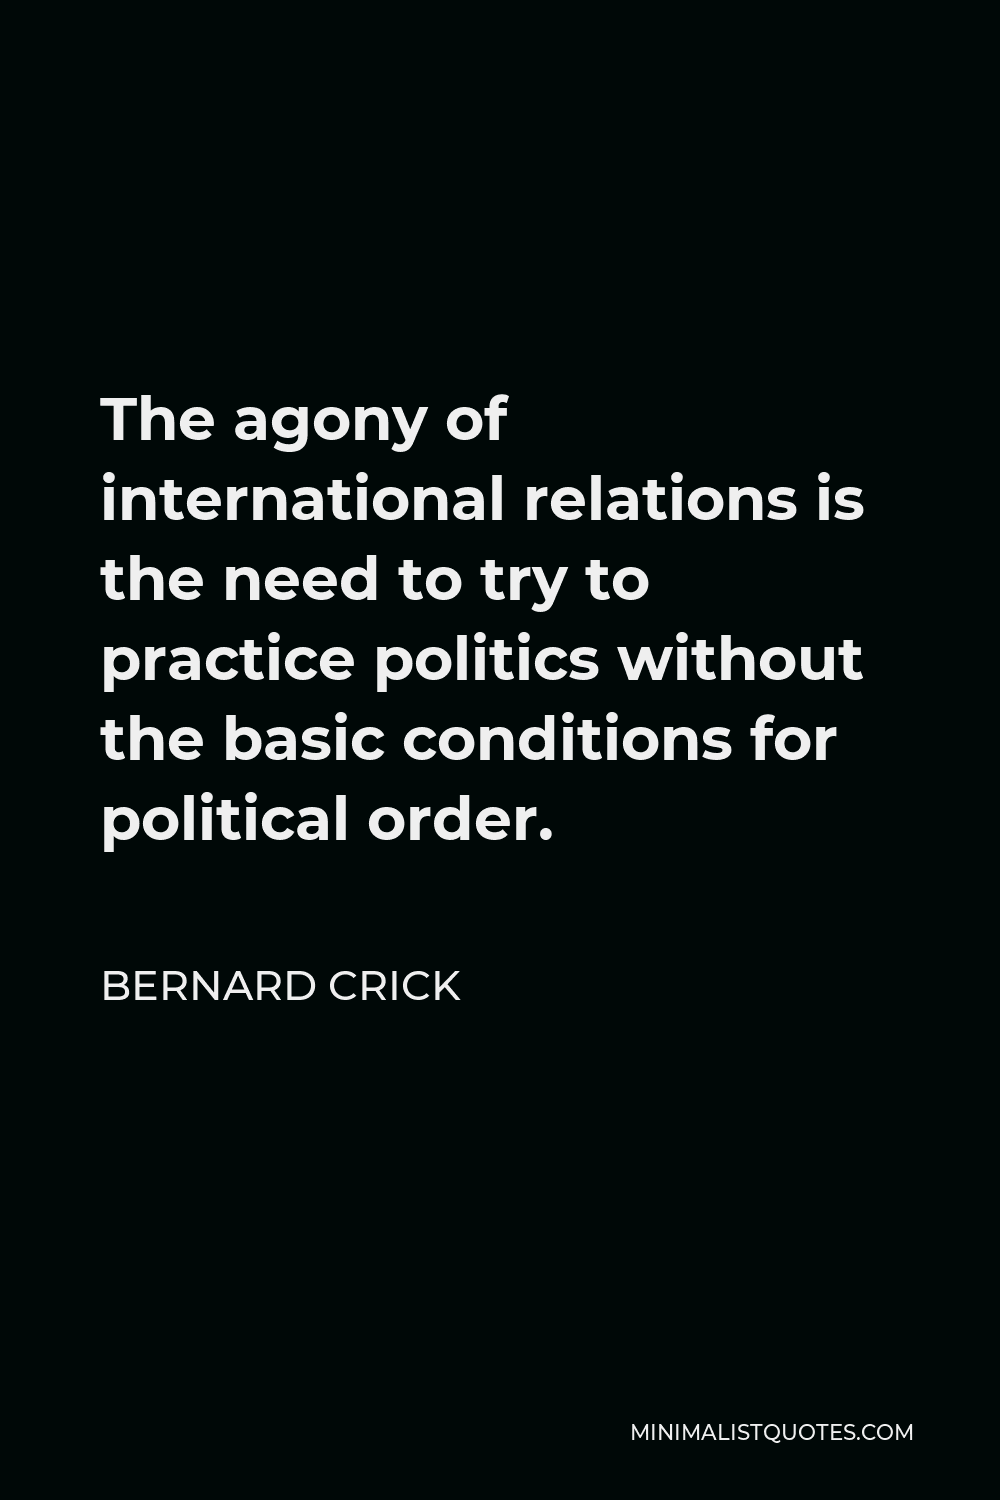 Bernard Crick Quote - The agony of international relations is the need to try to practice politics without the basic conditions for political order.